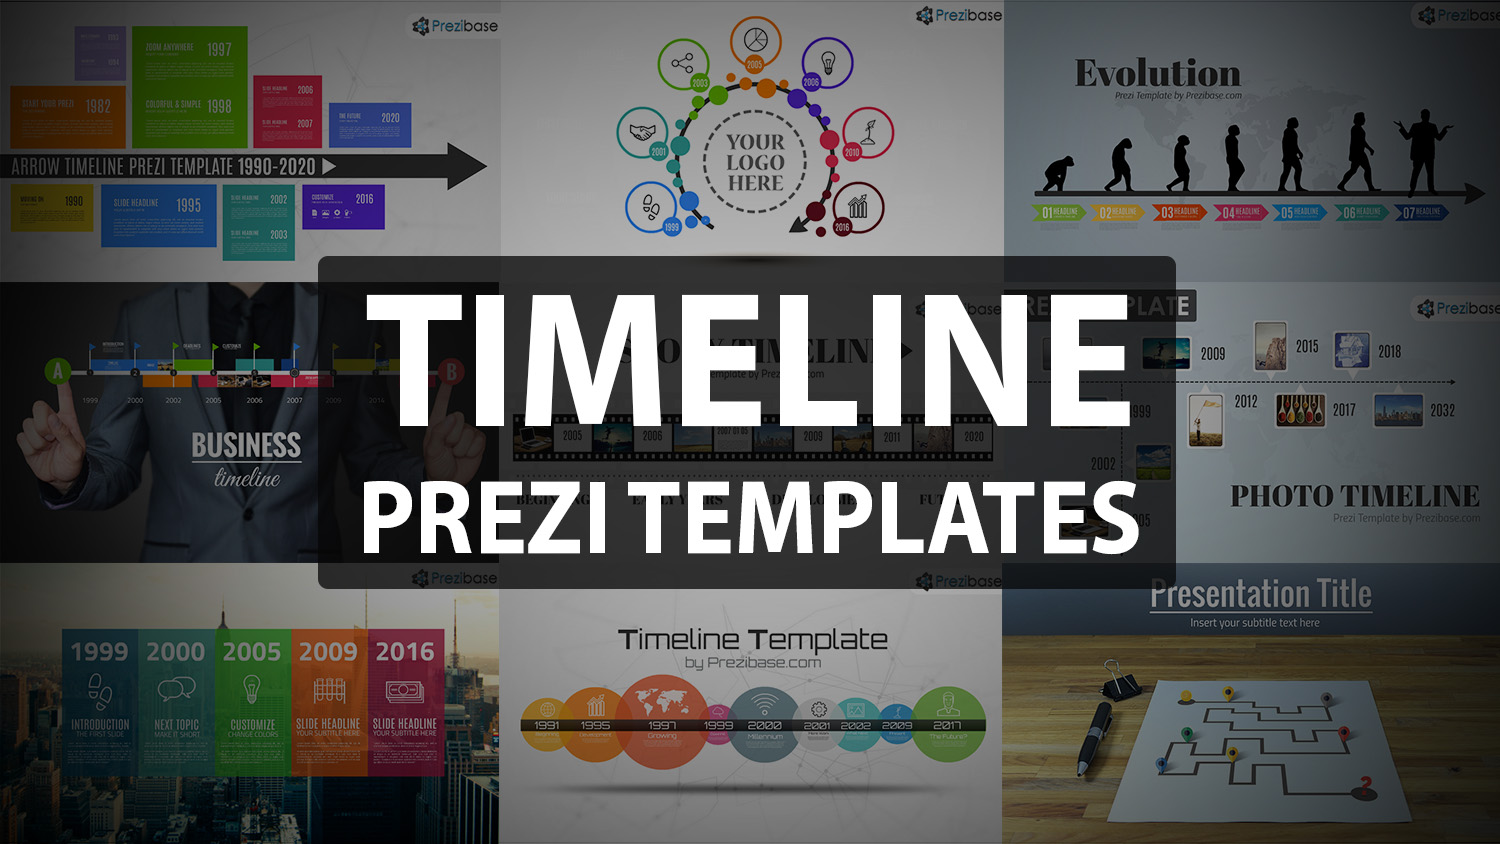 Technology, IT and internet prezi templates for presentations